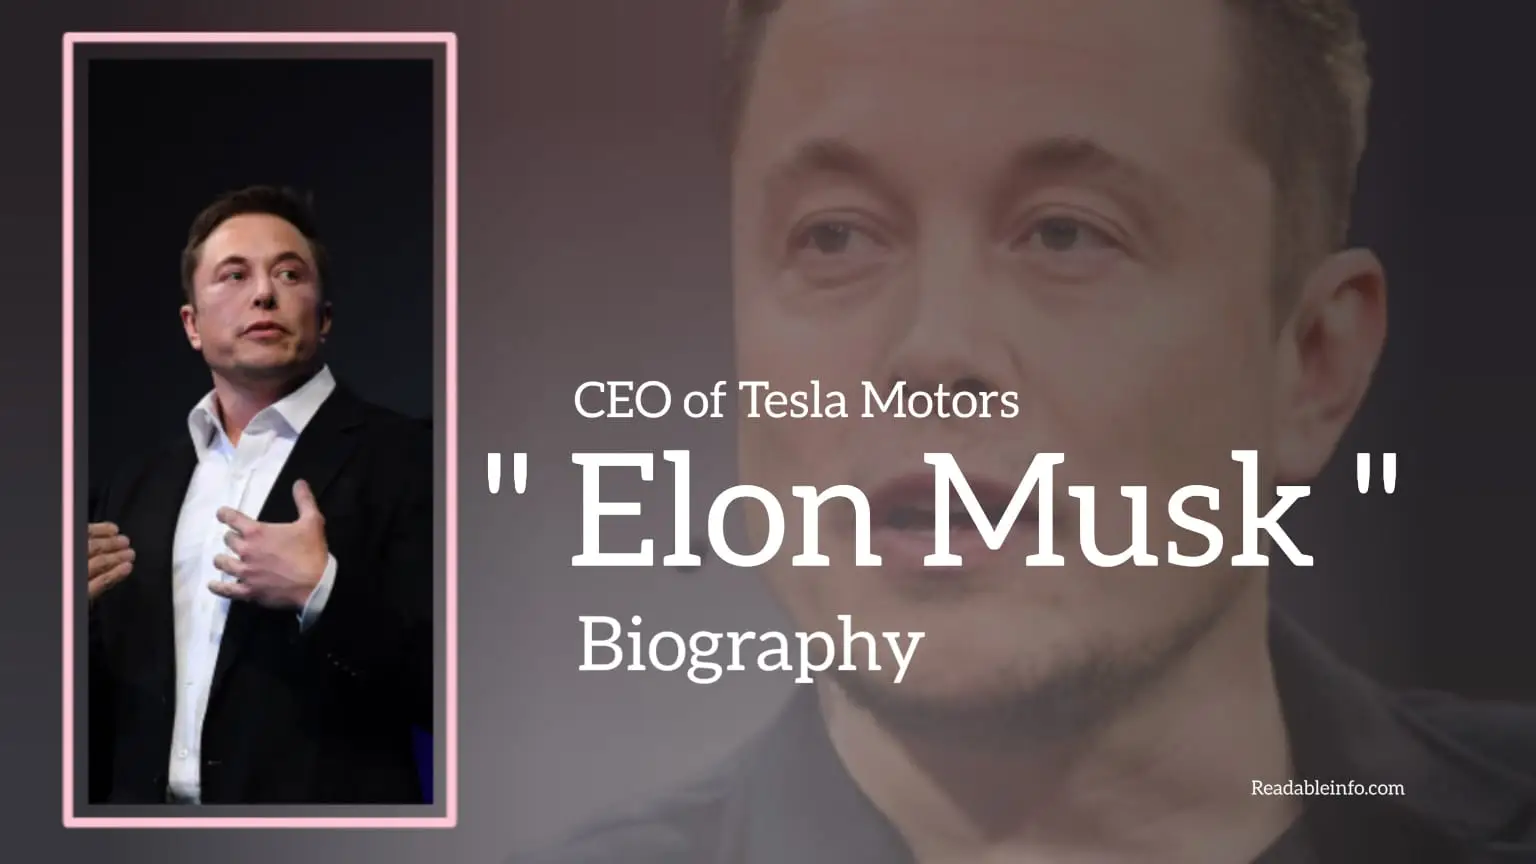 You are currently viewing Elon Musk Biography (CEO of Tesla Motors)